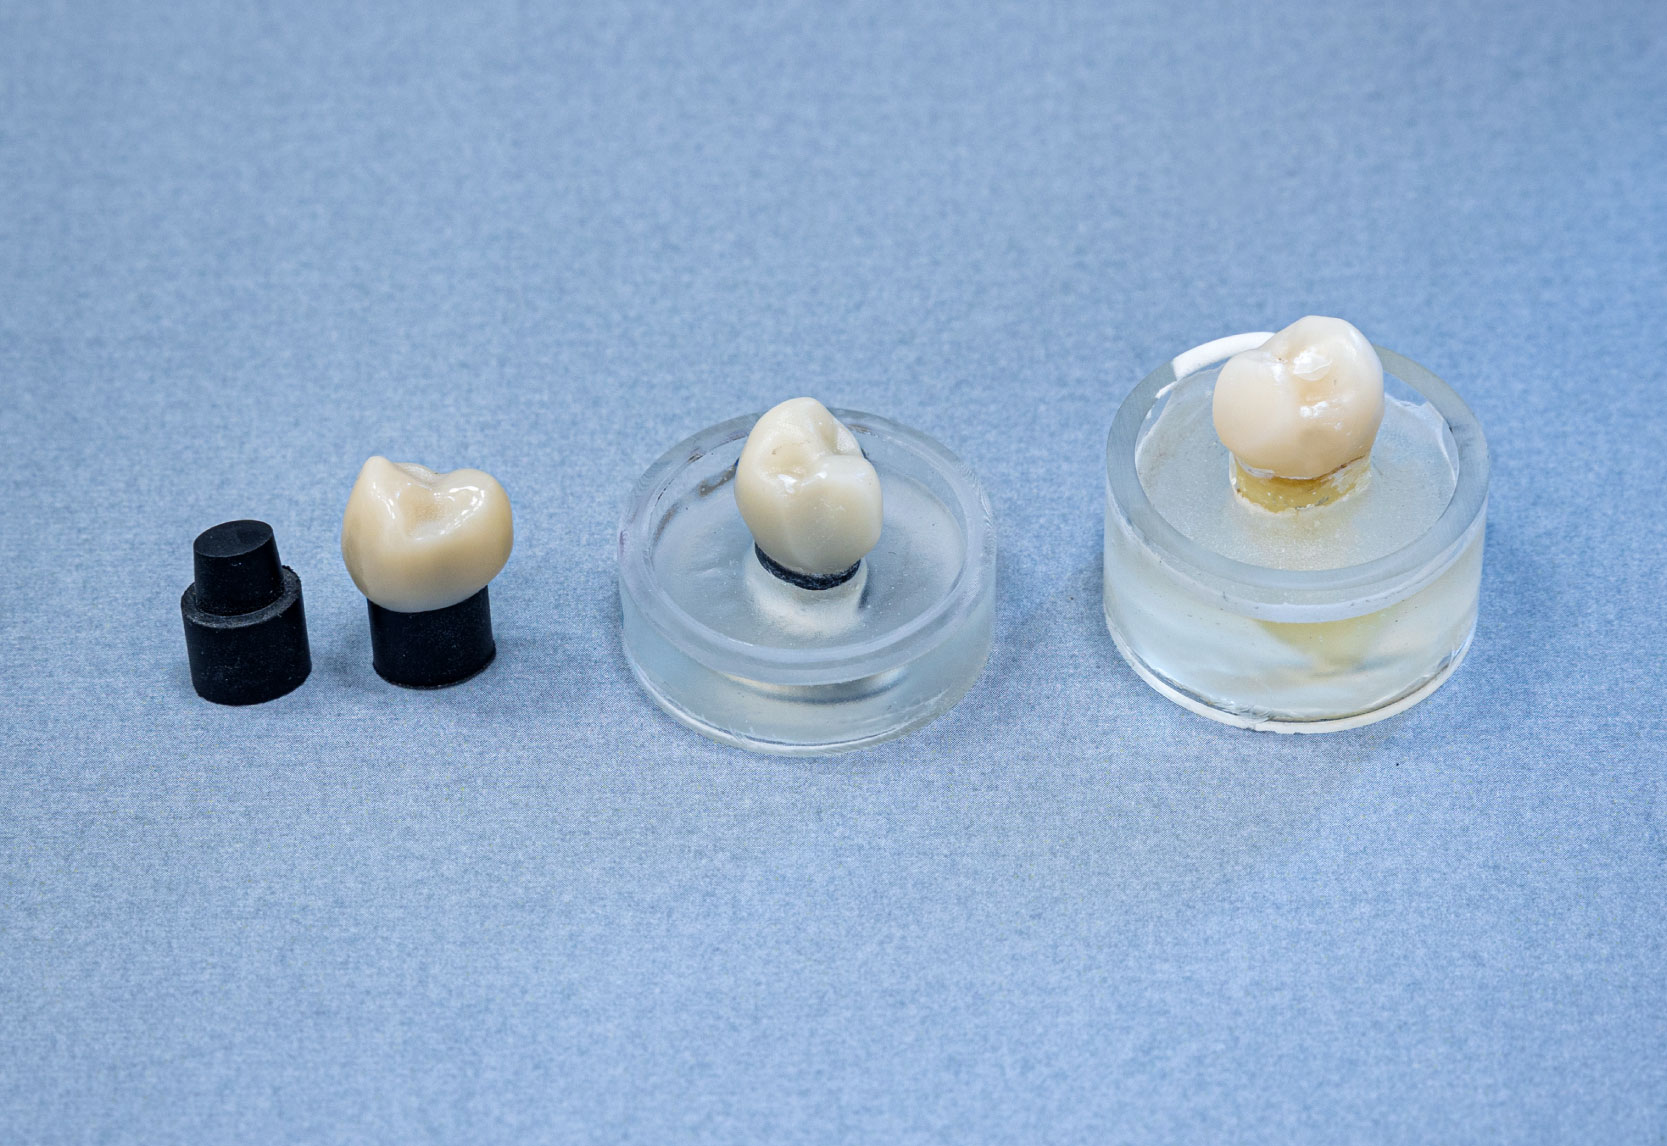 DMS Team Invented Substitute to Replace Human Teeth for Dental Research